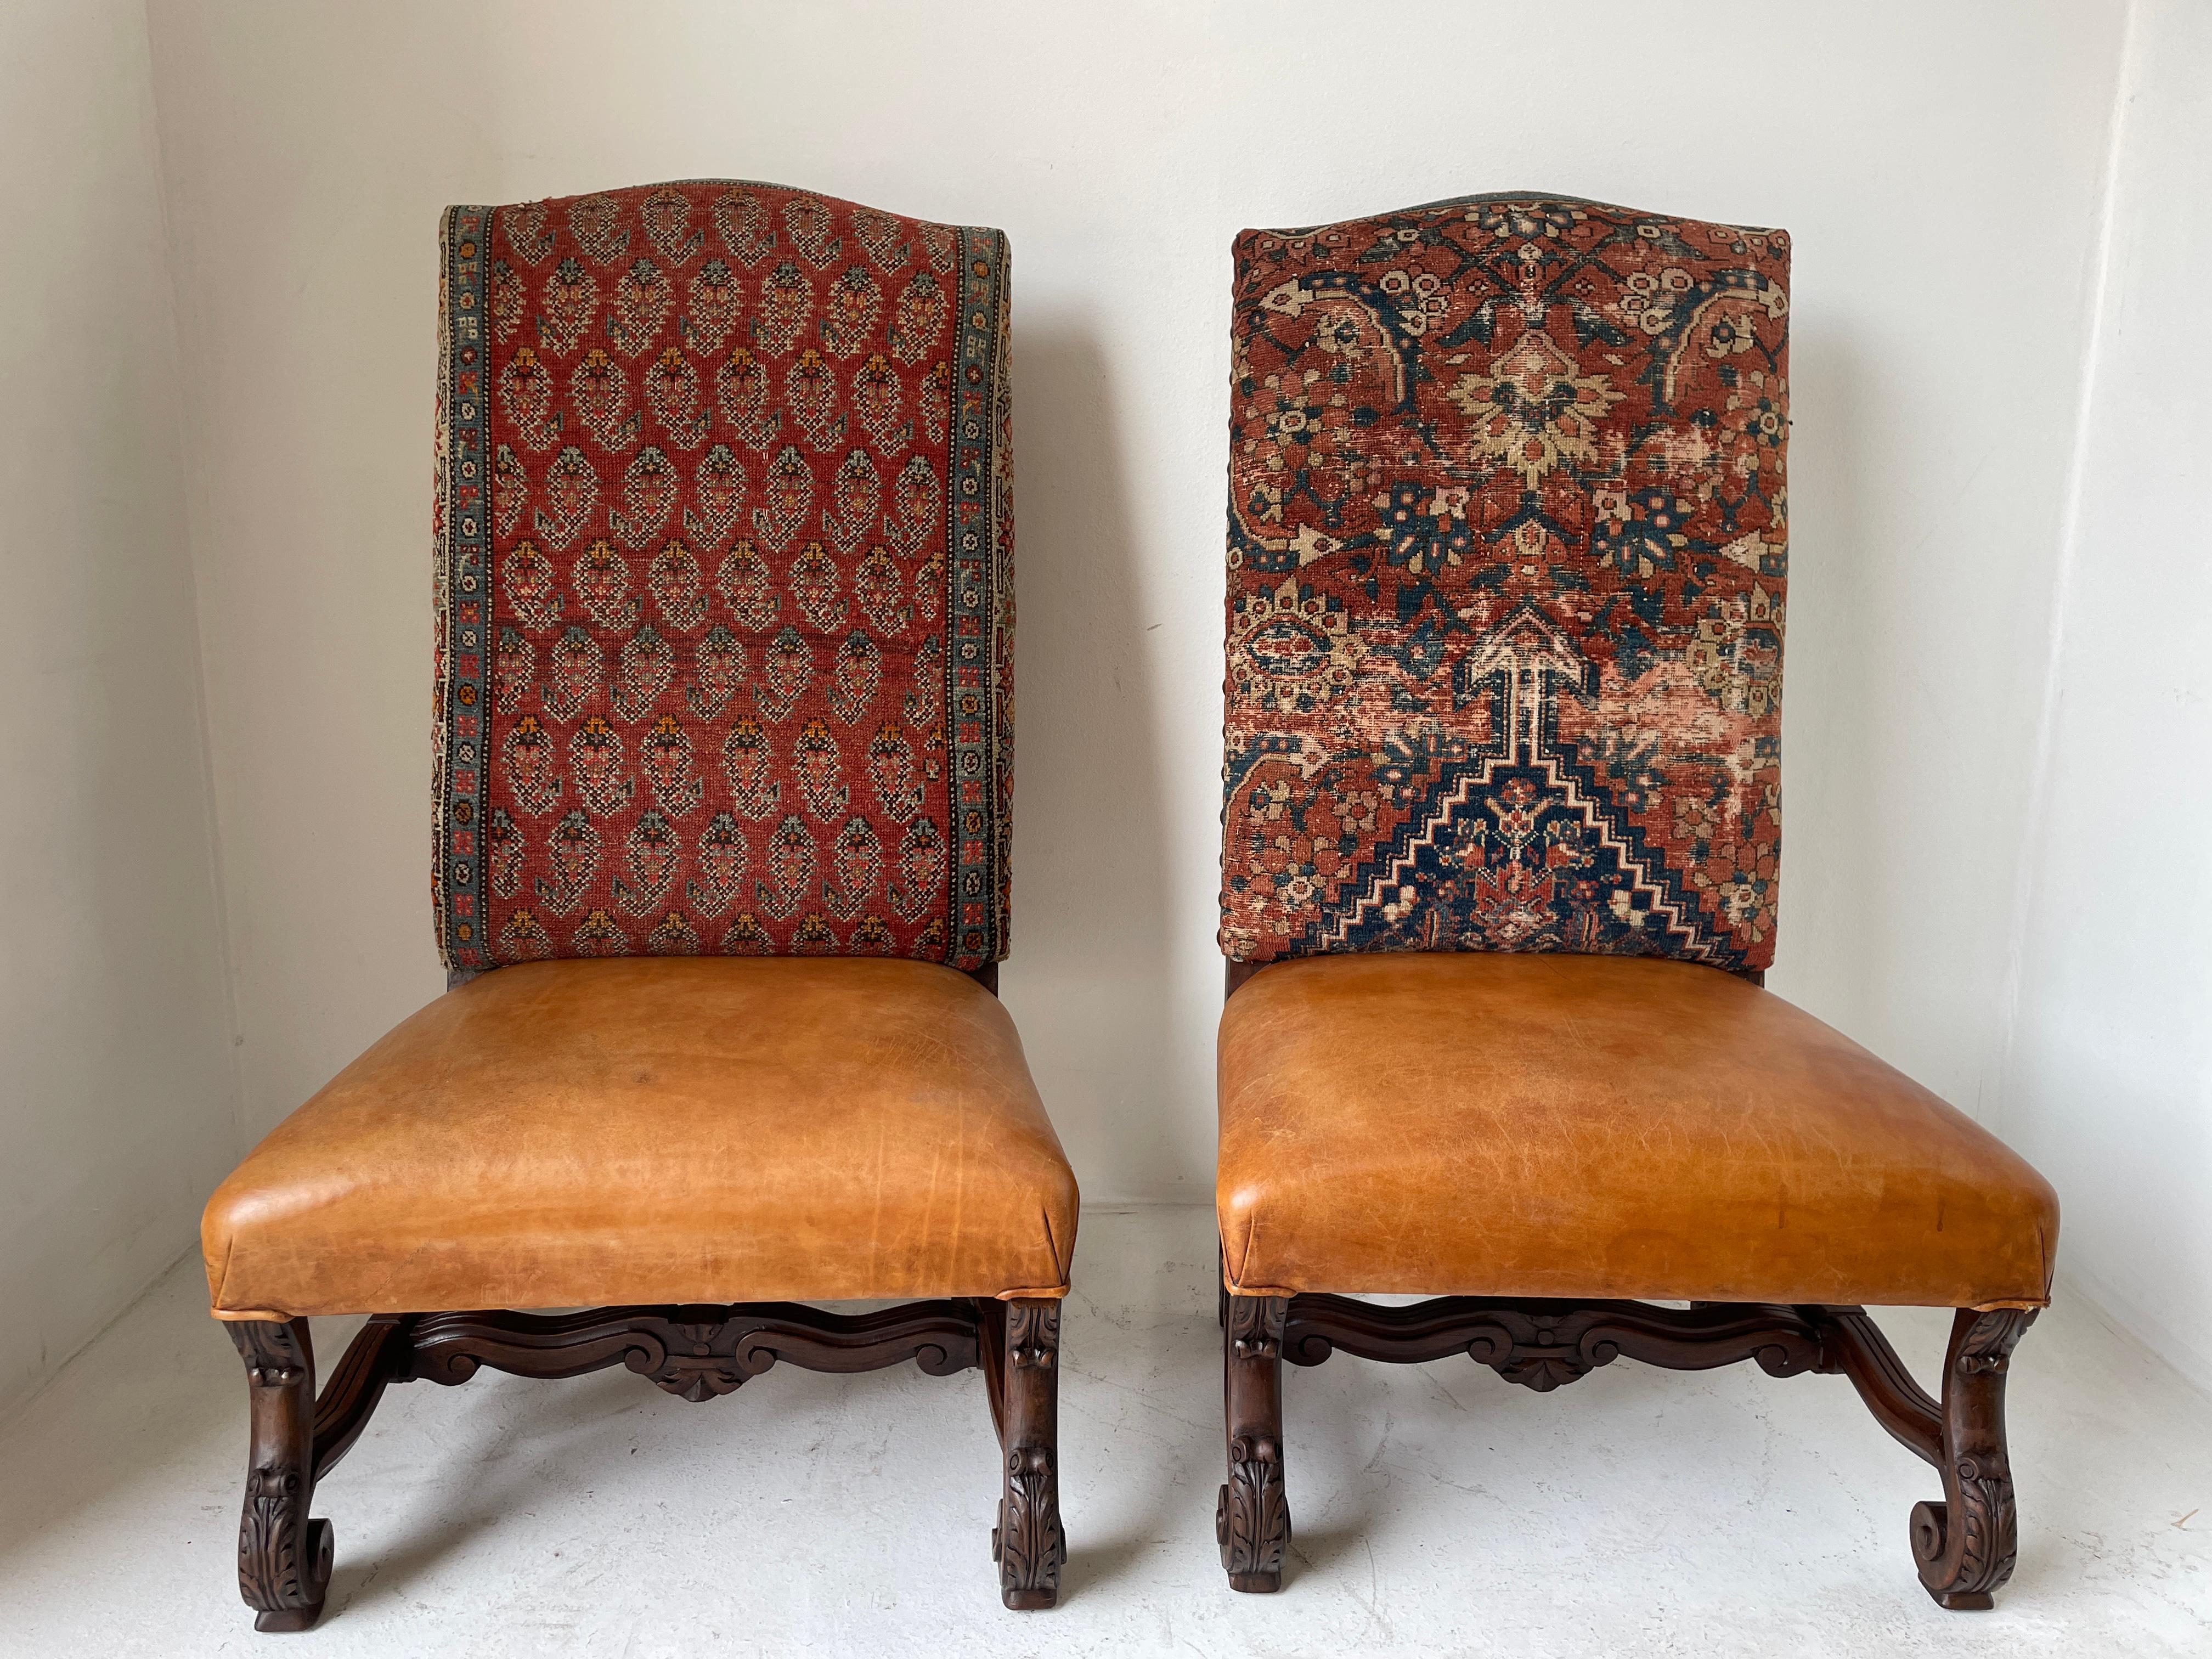 A 19th century Louis XIII style French, Spanish Colonial High-backed side chairs made of solid walnut.
Spanish Colonial Pair of Carved Walnut Leather and Tapestry Covered Side Chairs Fauteuils.
Decorate a entryway, hall, living room or bedroom with